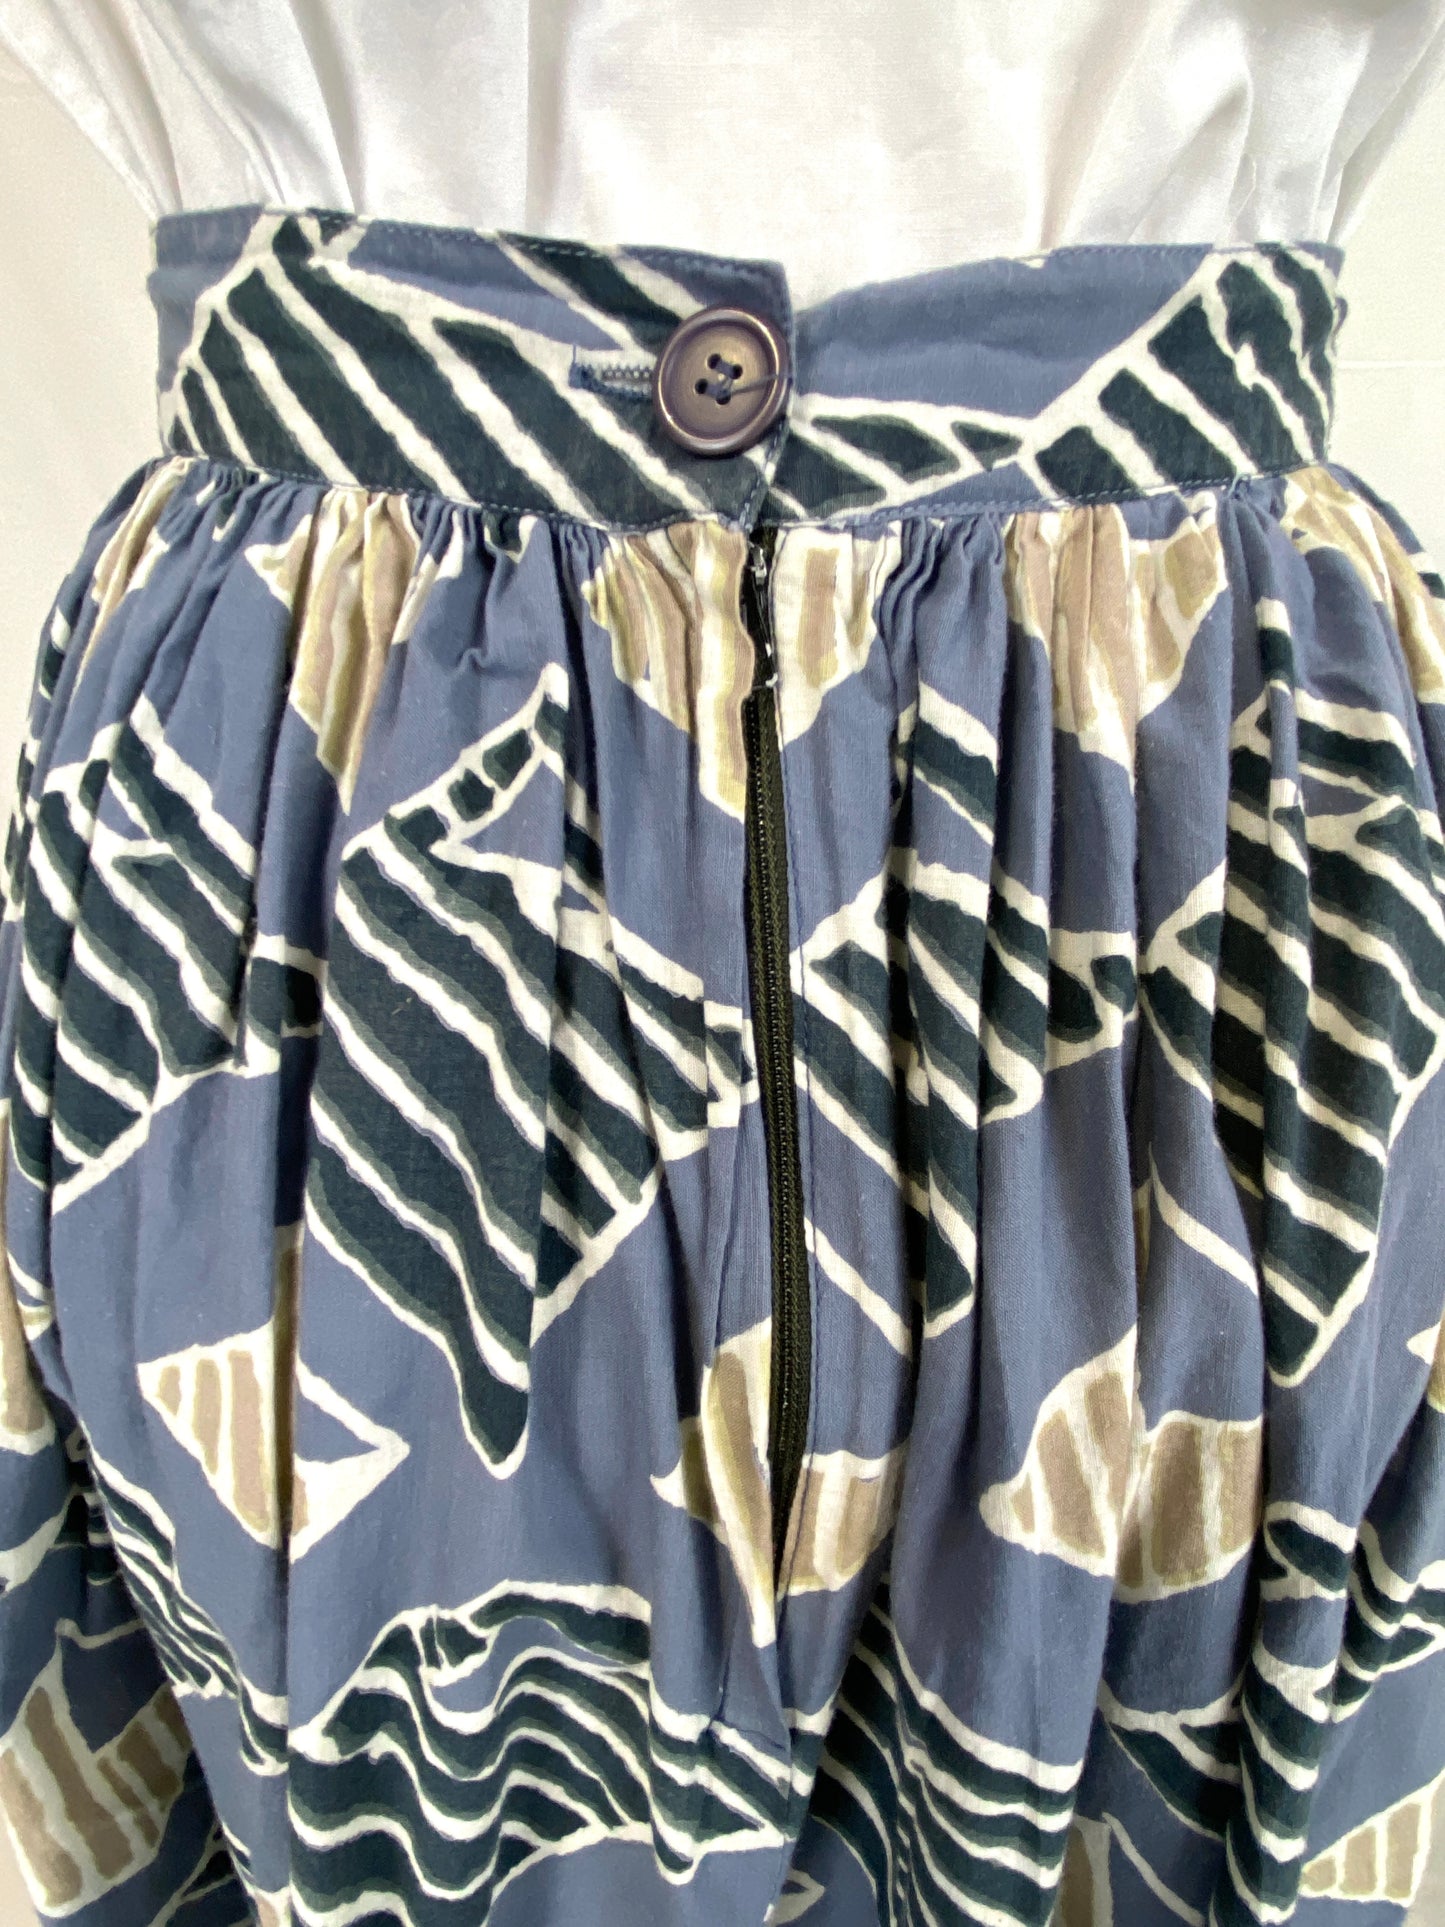 Zipper and button closure on 80s cotton skirt. Ian Drummond Vintage. 